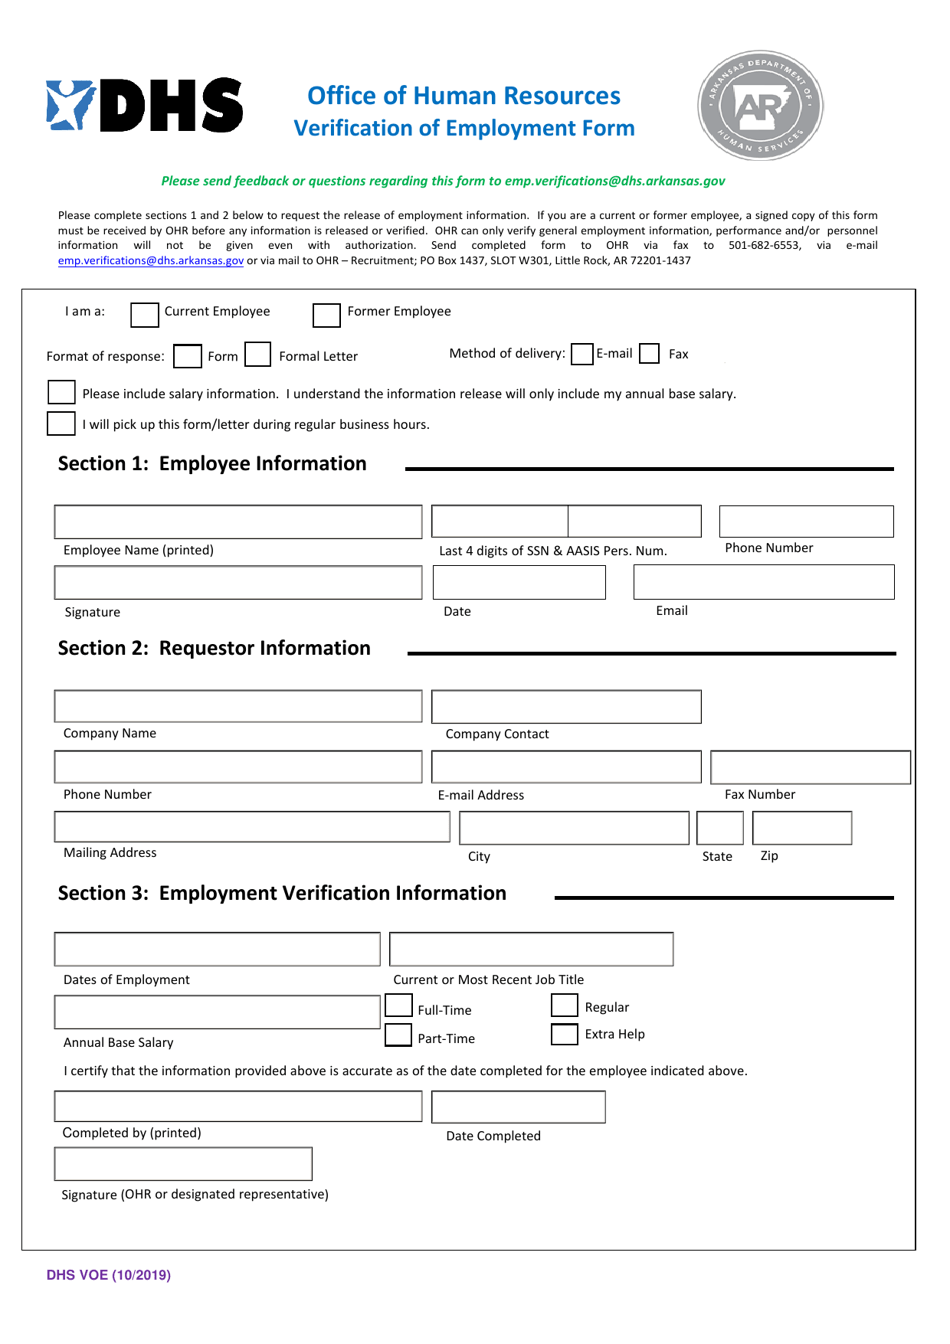 Form DHS VOE Verification of Employment Form - Arkansas, Page 1